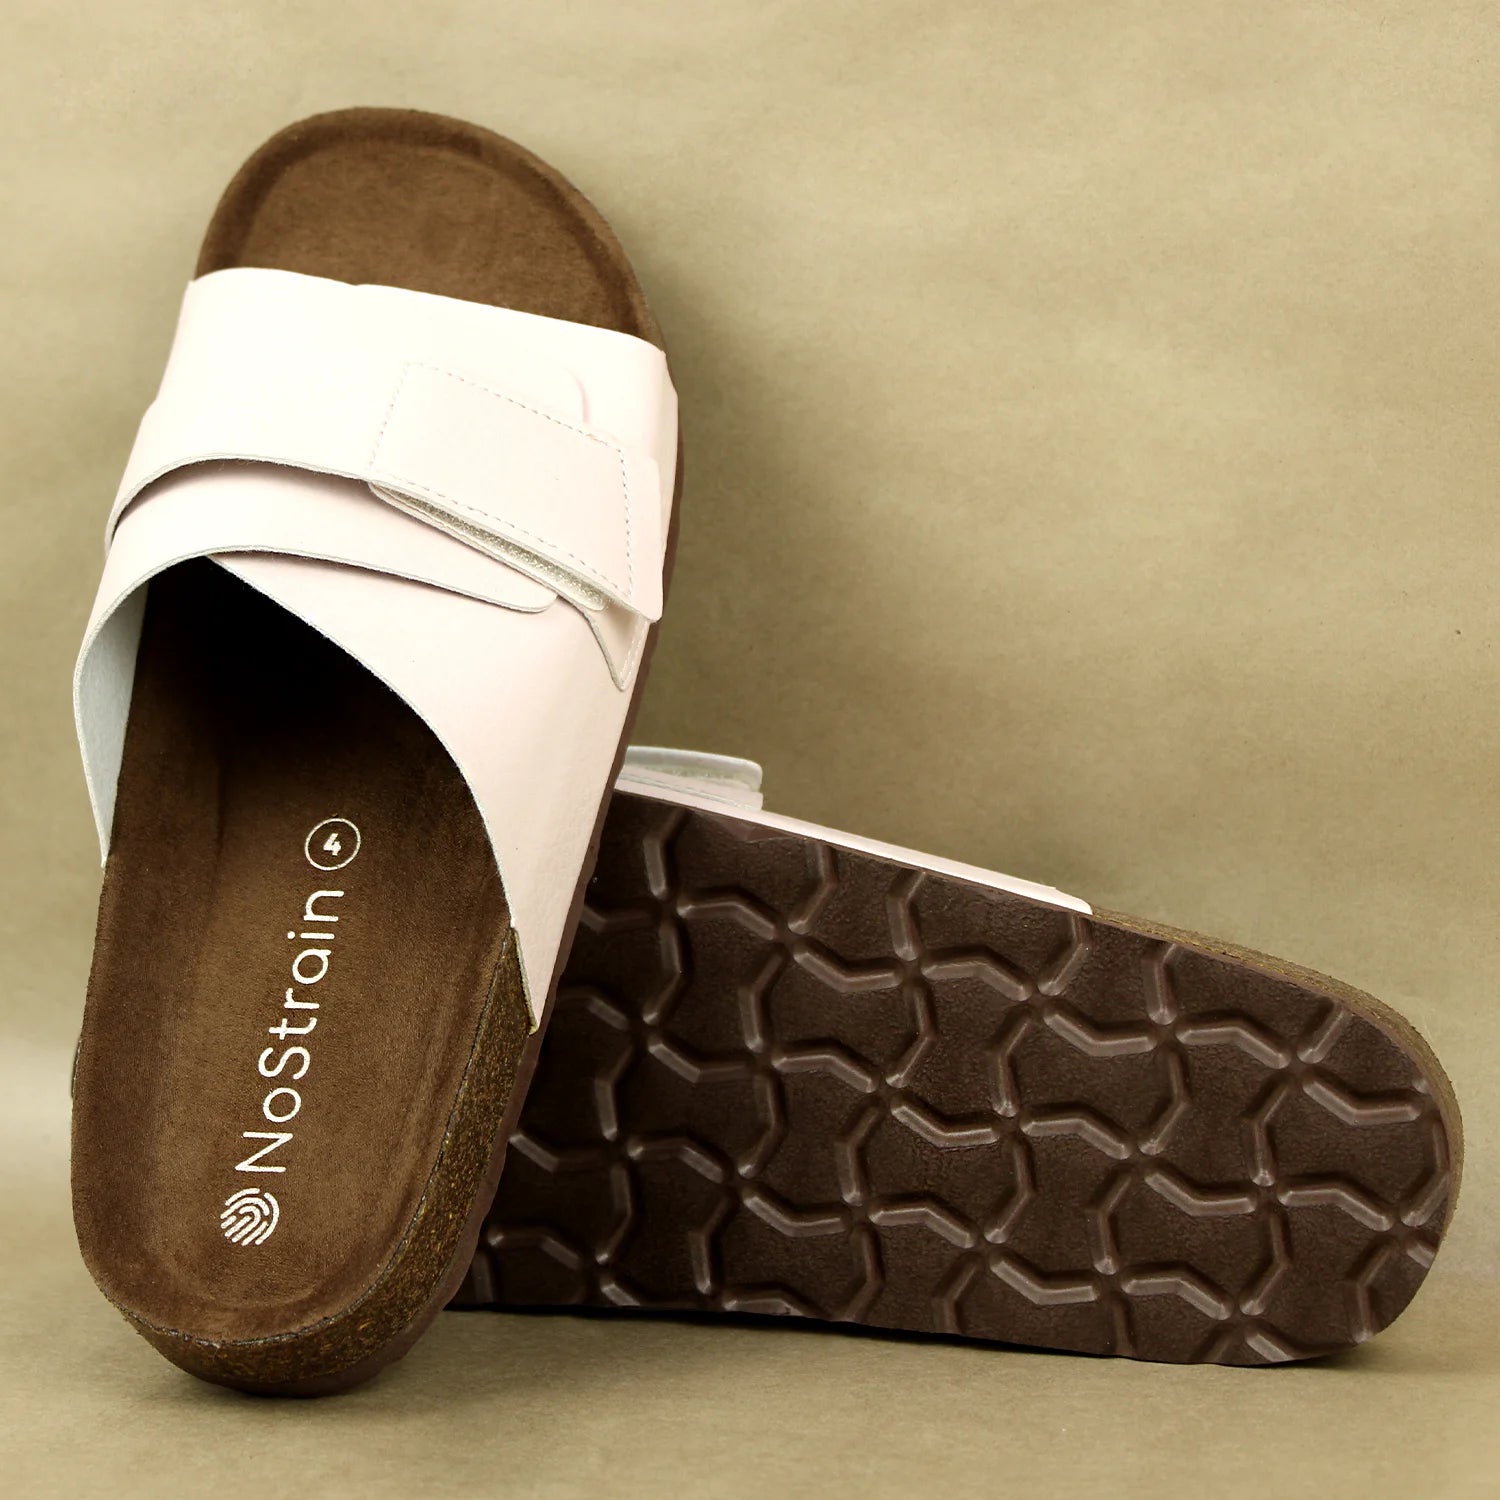 Buy LISBON Sandals in Cork and Suede Online in India - Etsy